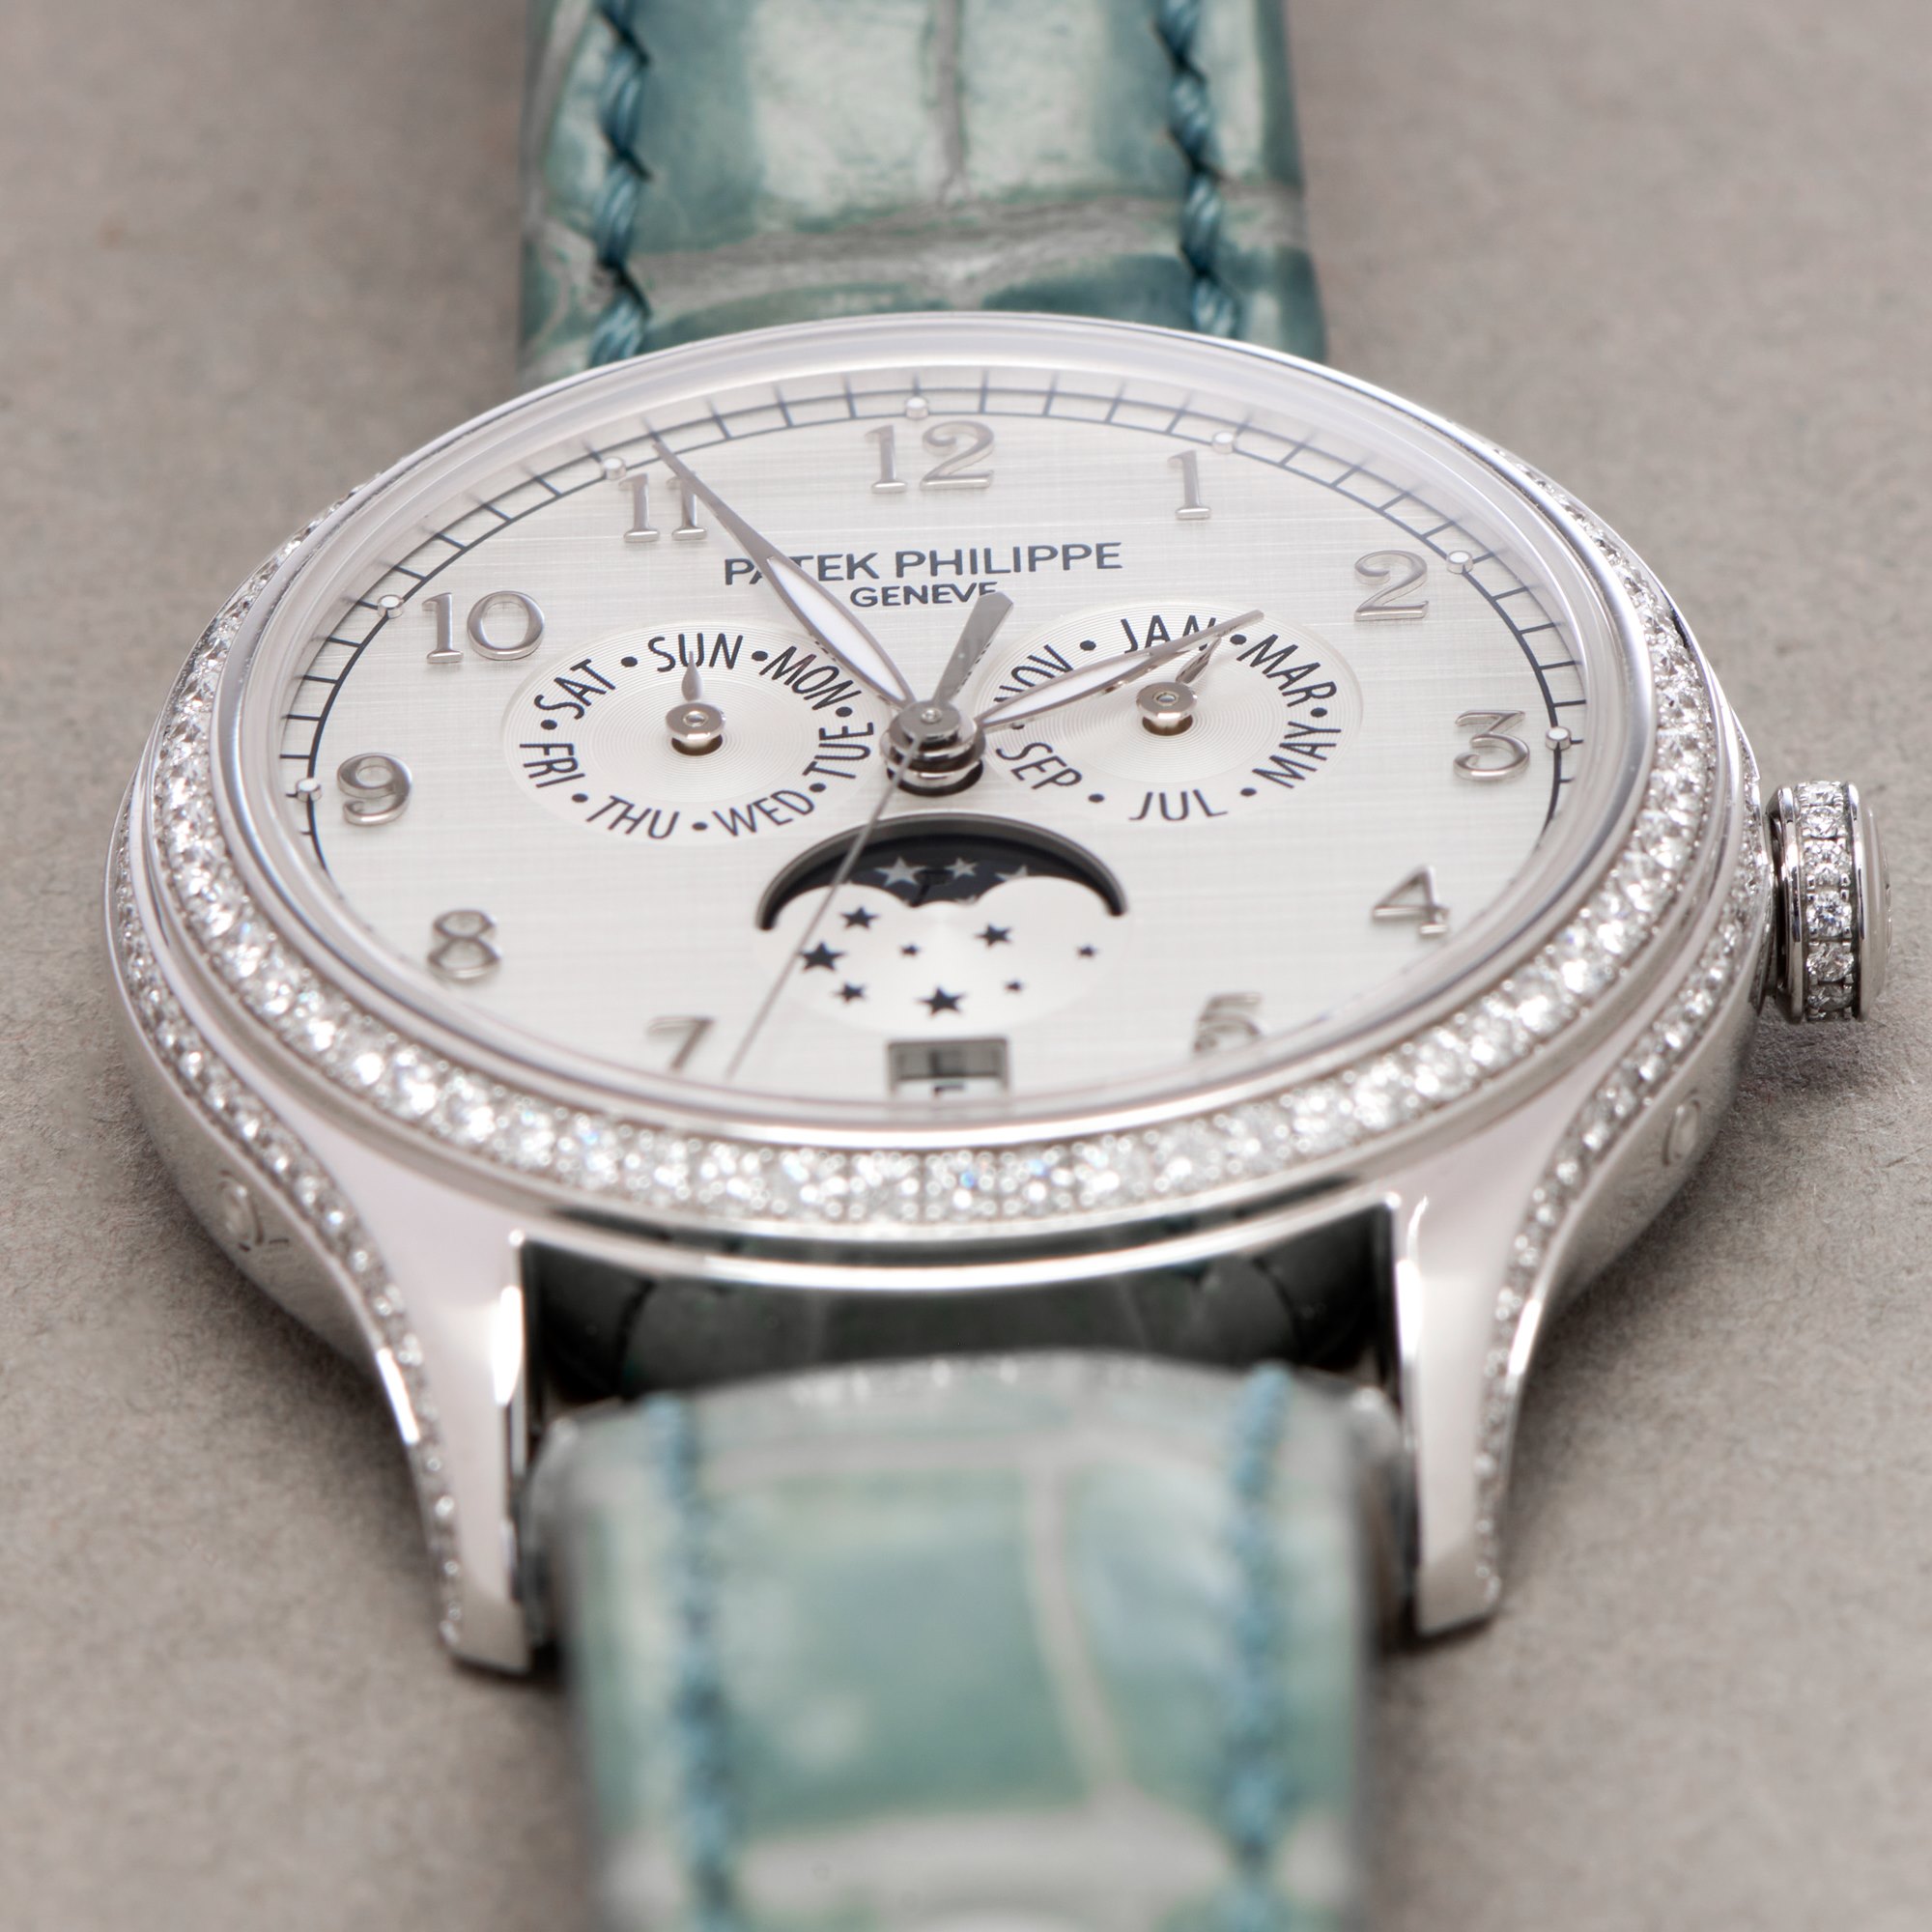 Patek Philippe Complications Annual Calendar 18K White Gold Watch 4947G-010 - Image 8 of 11